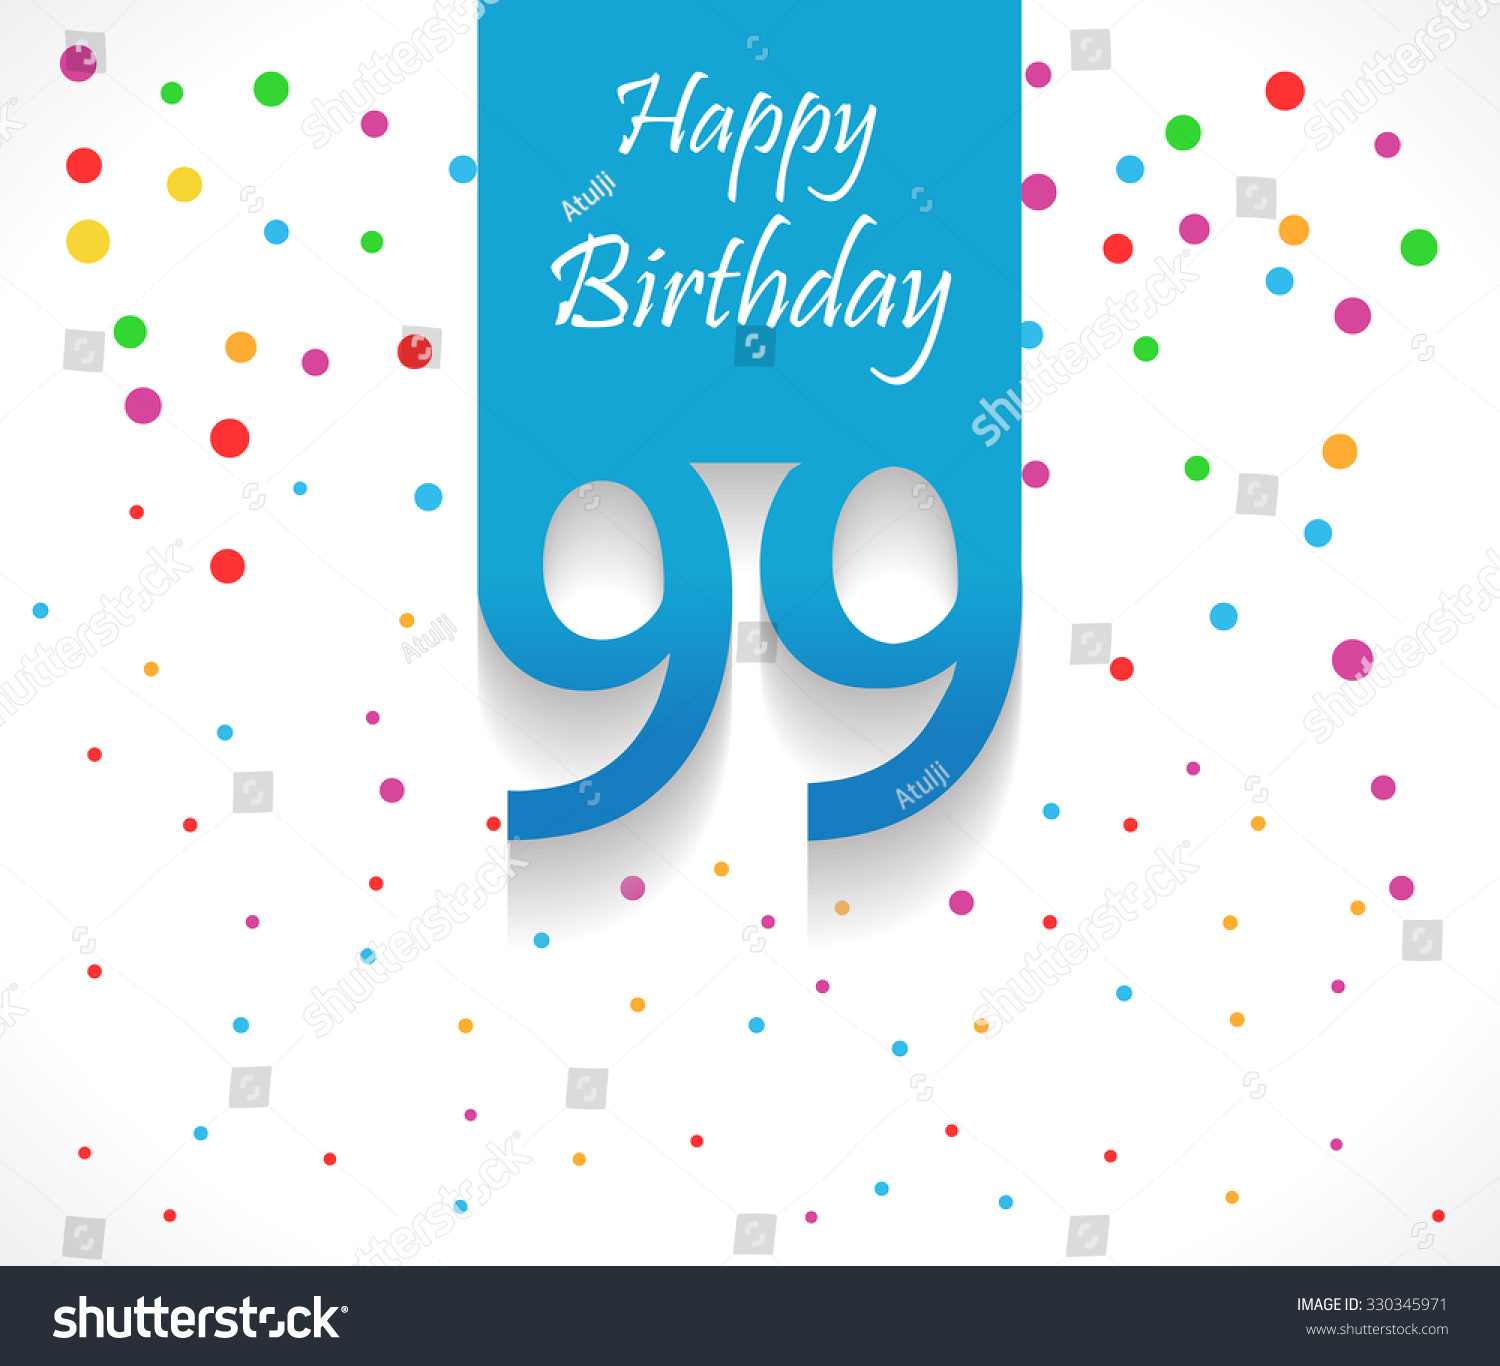 99 Years Happy Birthday Background Or Card With Colorful Confetti With